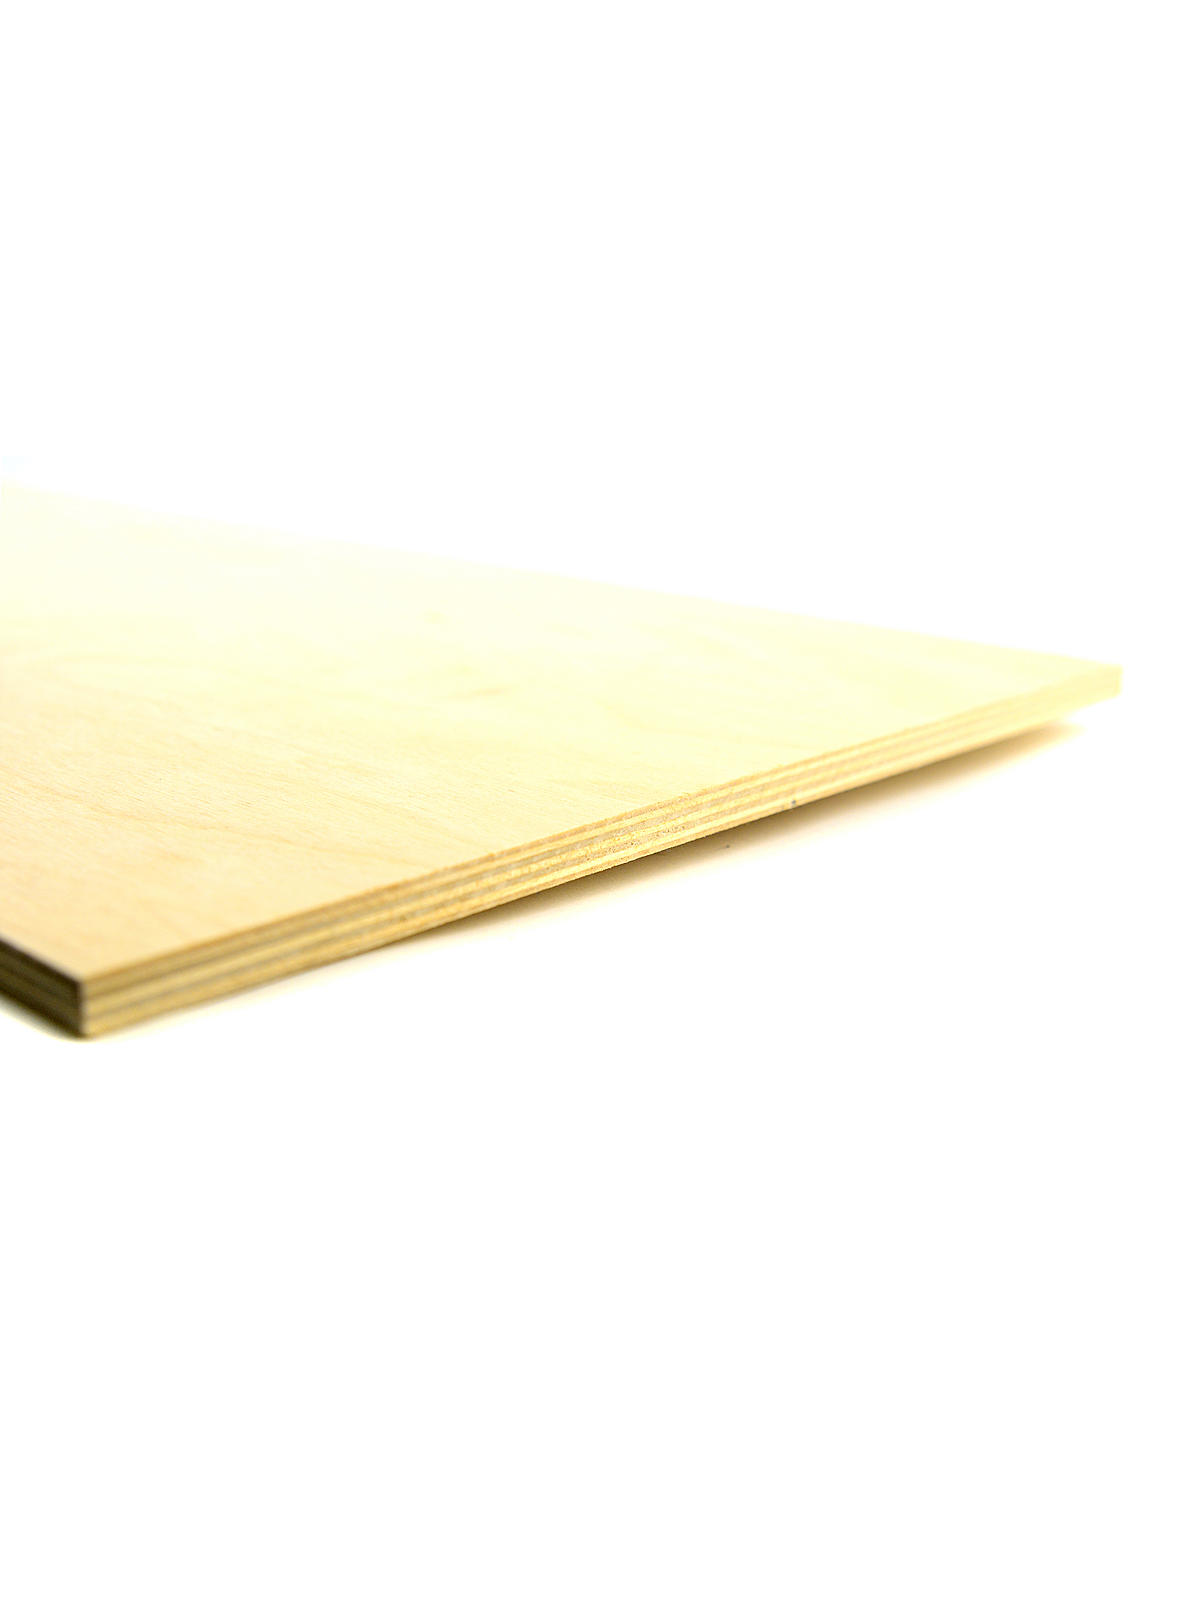 Craft Plywood Sheets 3 8 In. 12 In. X 24 In.